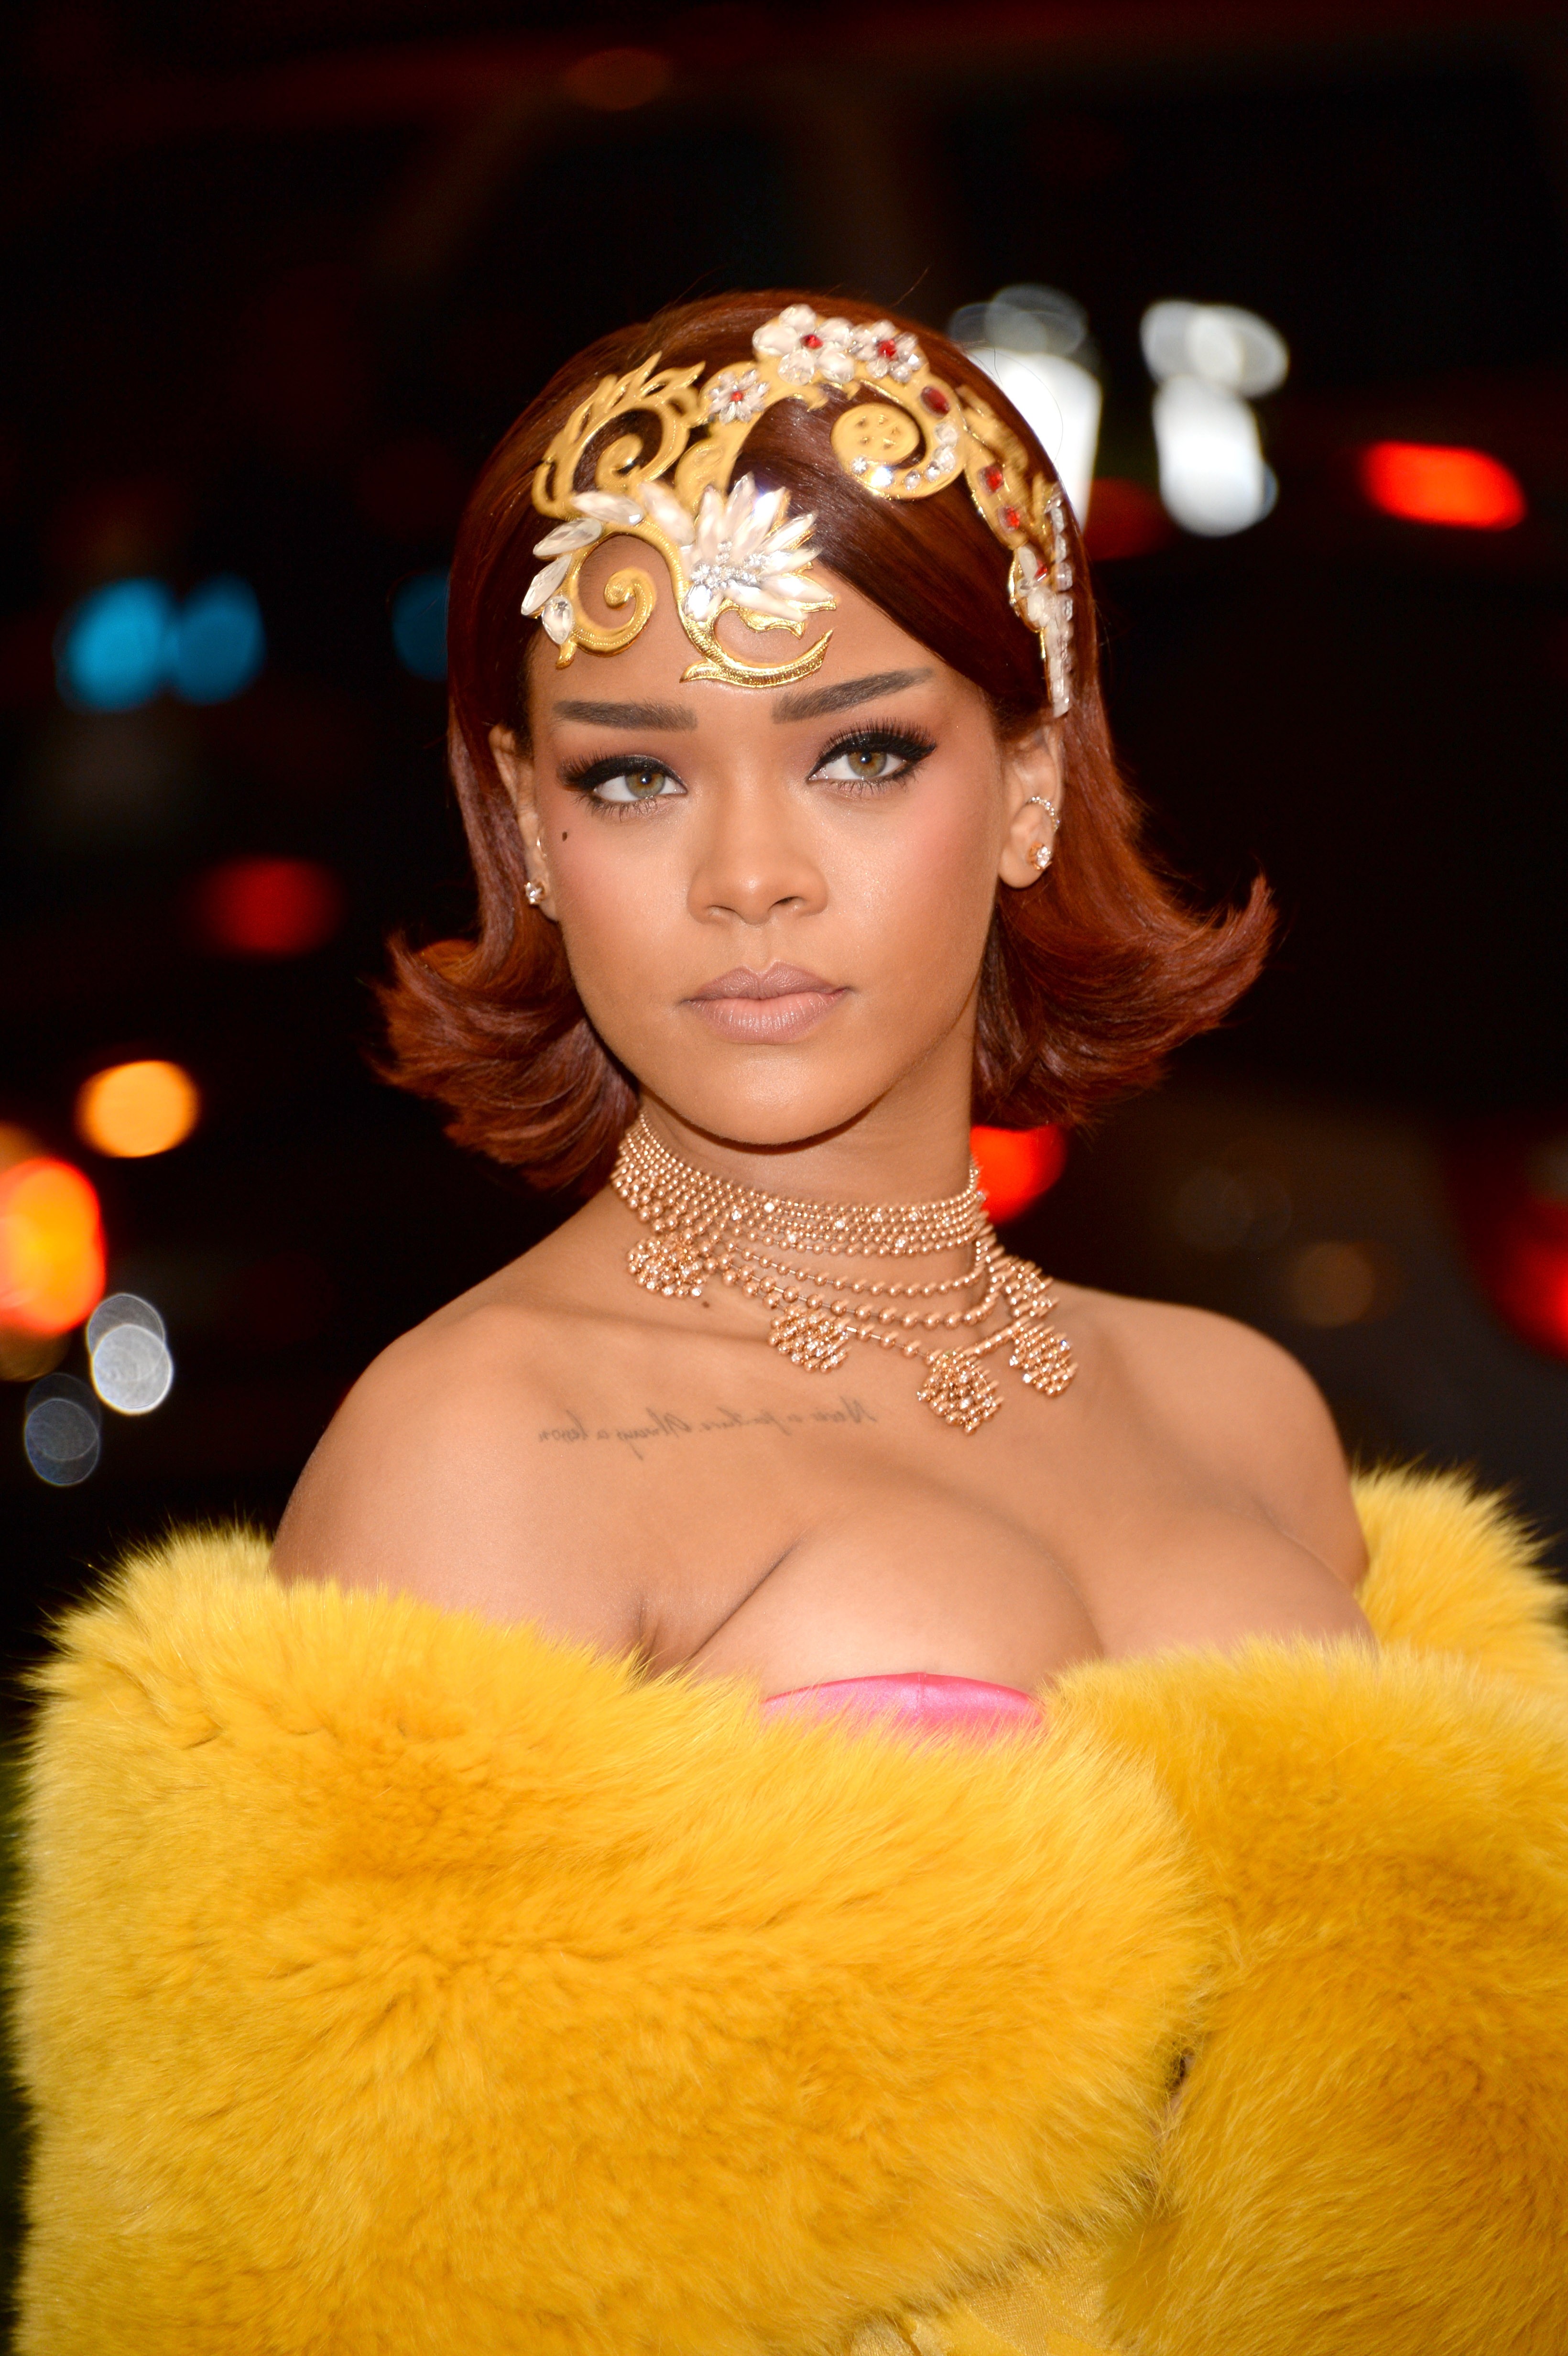 NEW YORK, NY - MAY 04:  Rihanna attends the "China: Through The Looking Glass" Costume Institute Benefit Gala at Metropolitan Museum of Art on May 4, 2015 in New York City.  (Photo by Kevin Mazur/WireImage) (Foto: WireImage)